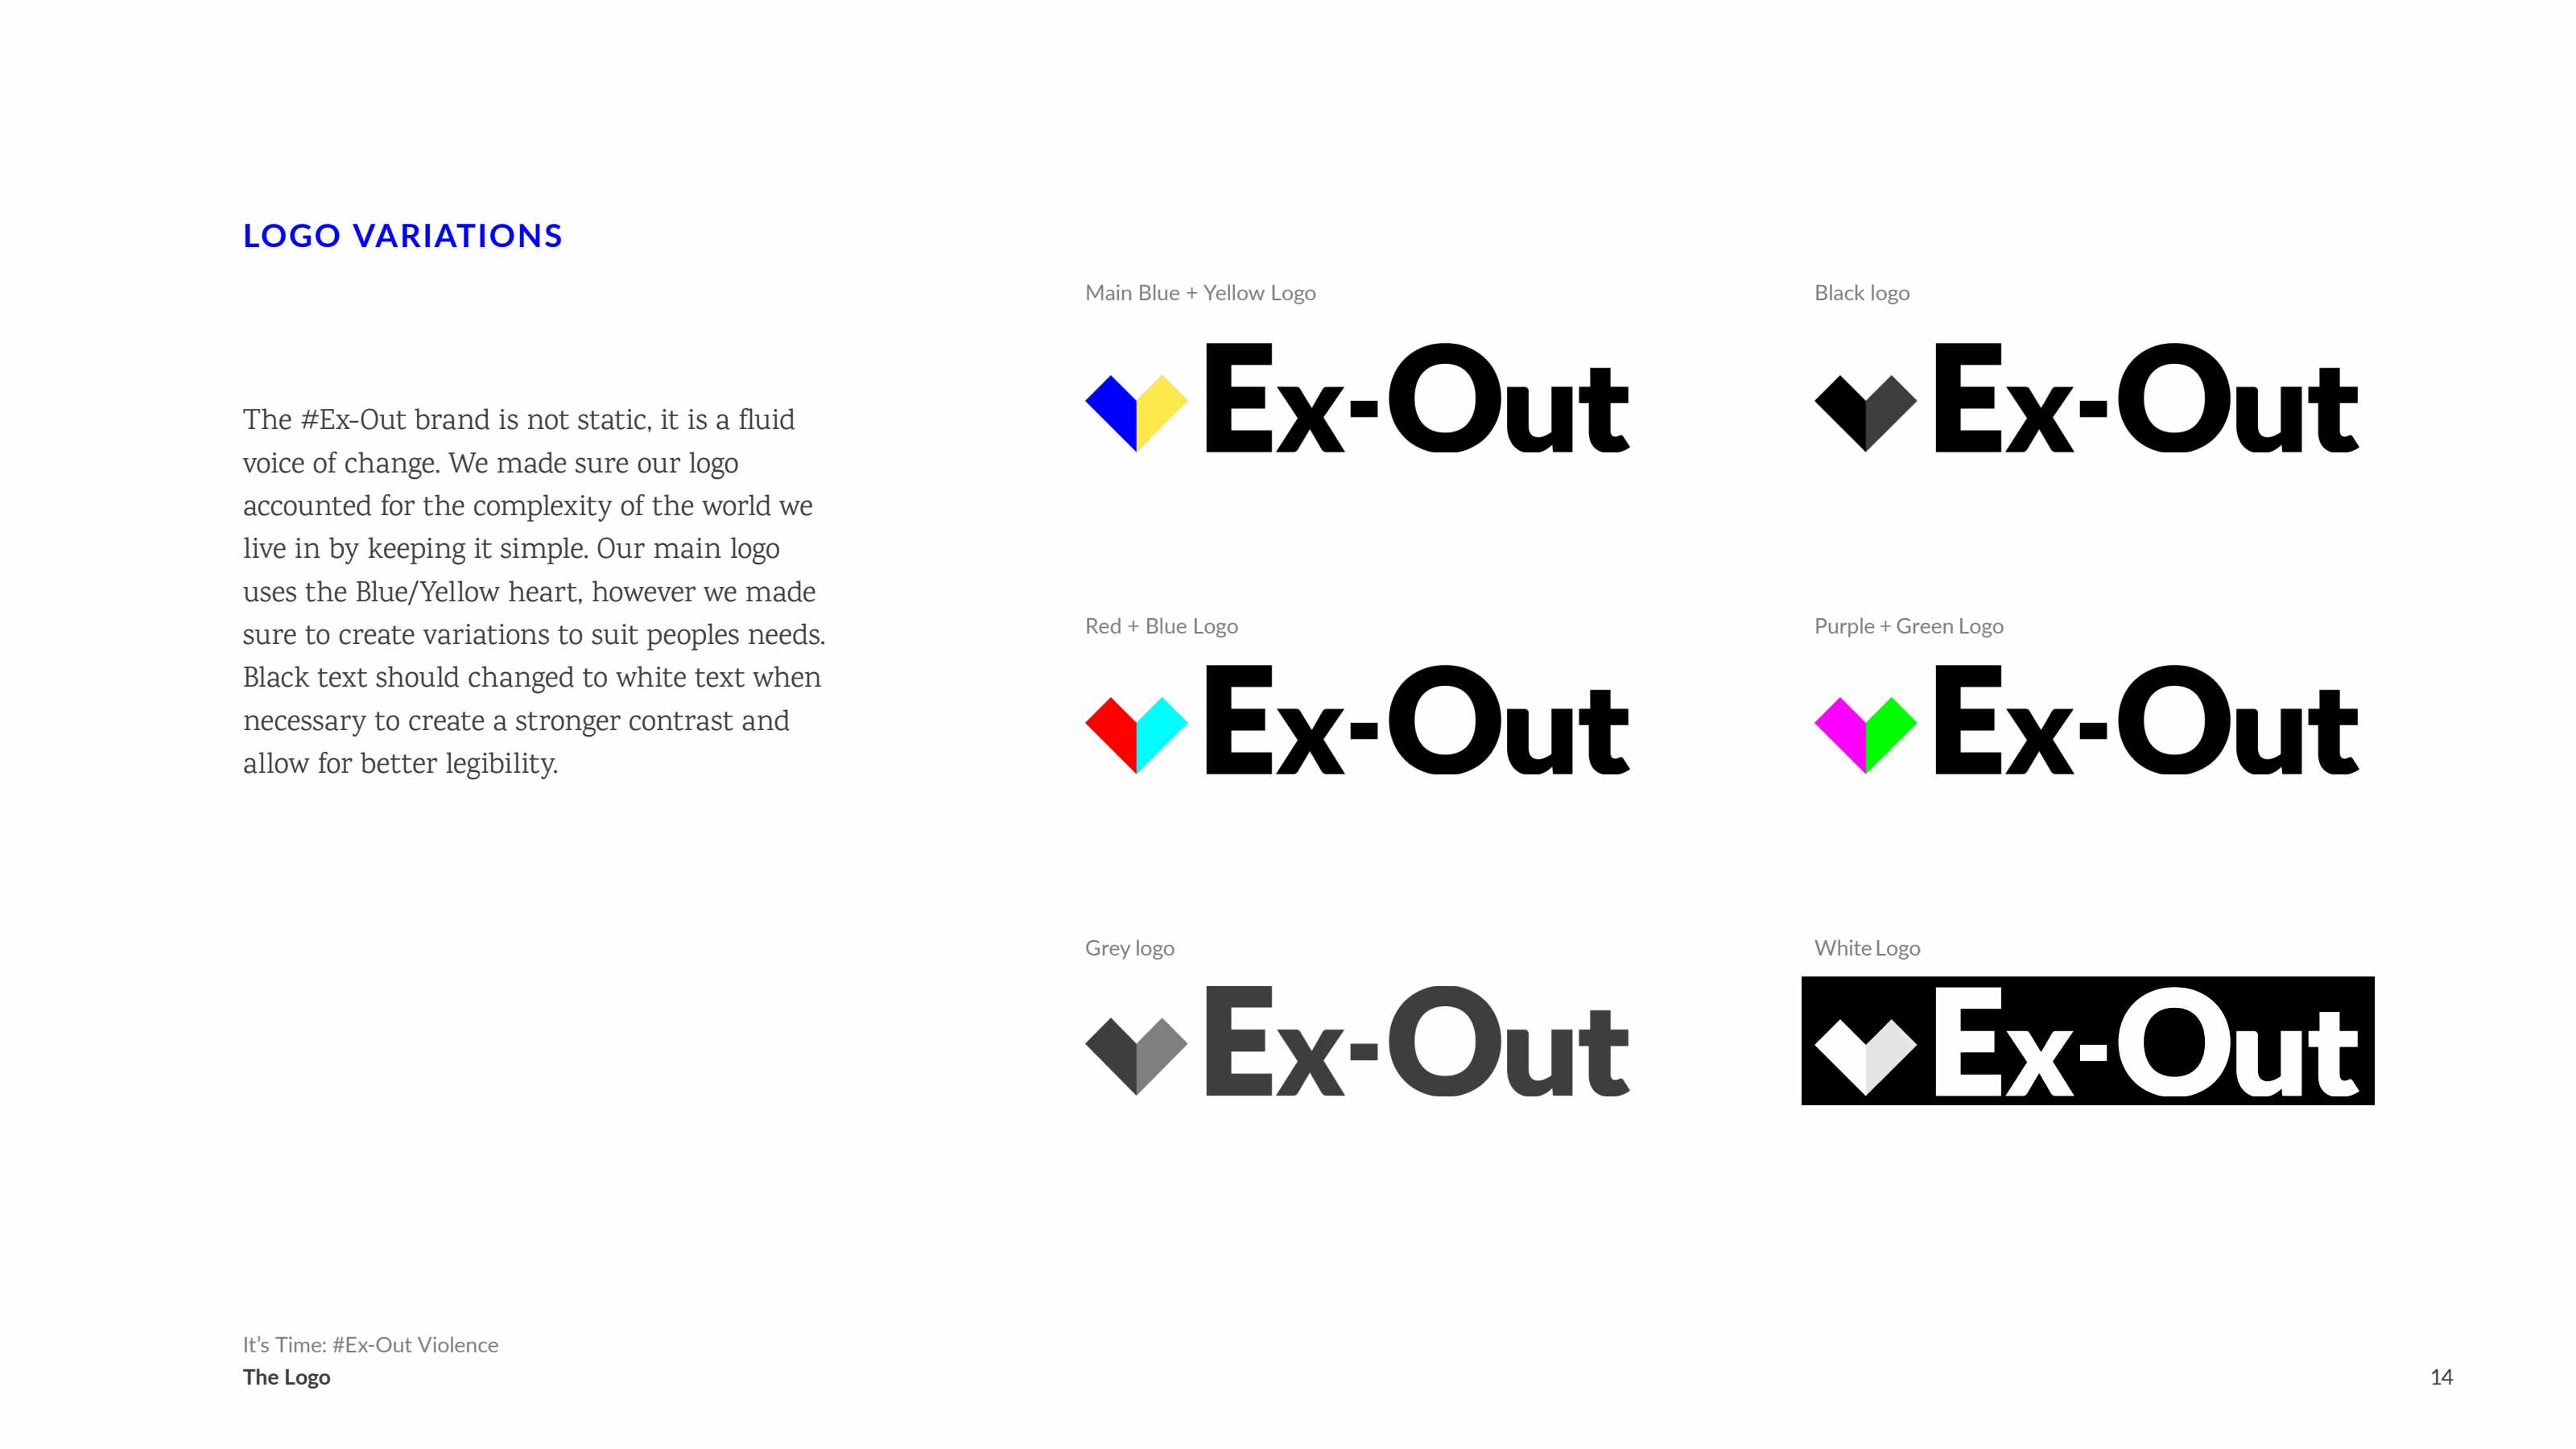 Ex-Out Brand Guide Page 14. Please download the PDF for an accessible read.